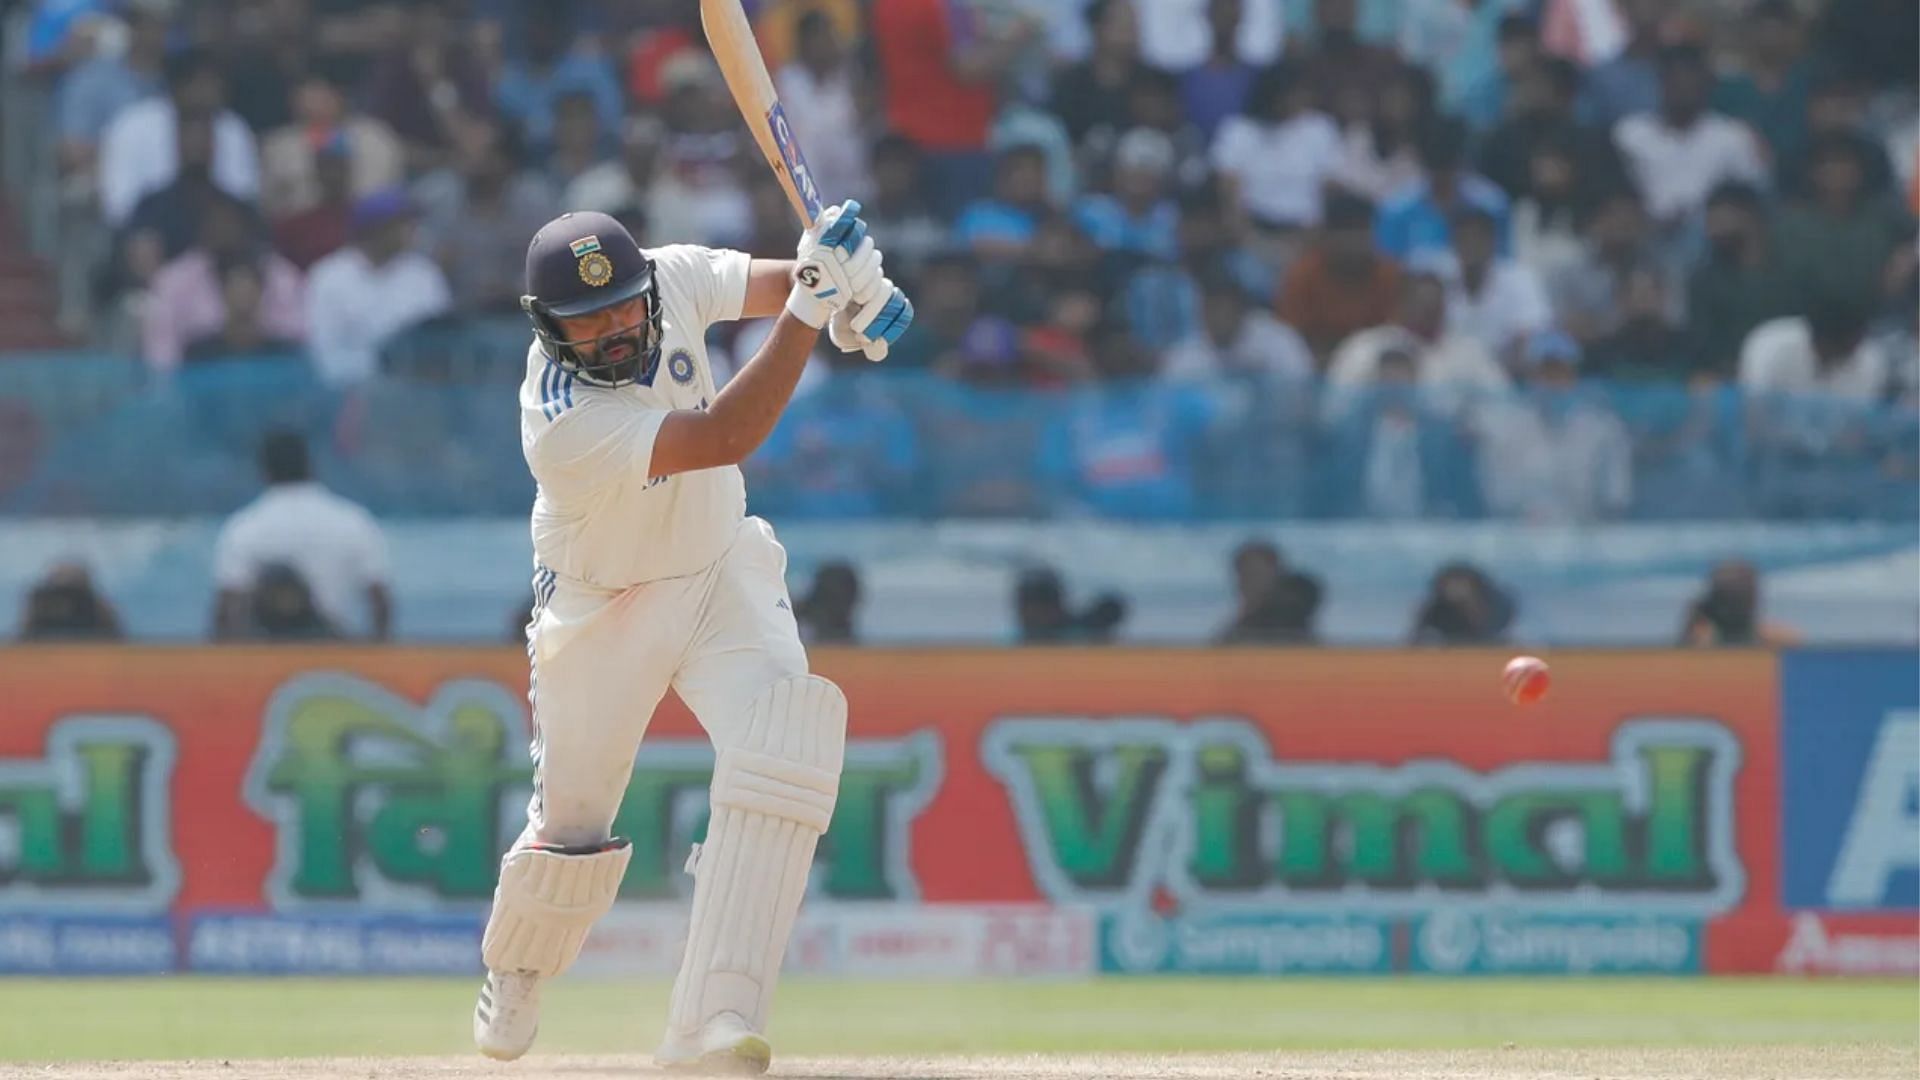 Rohit Sharma returns to Visakhapatnam, where it all began for him as a Test opener